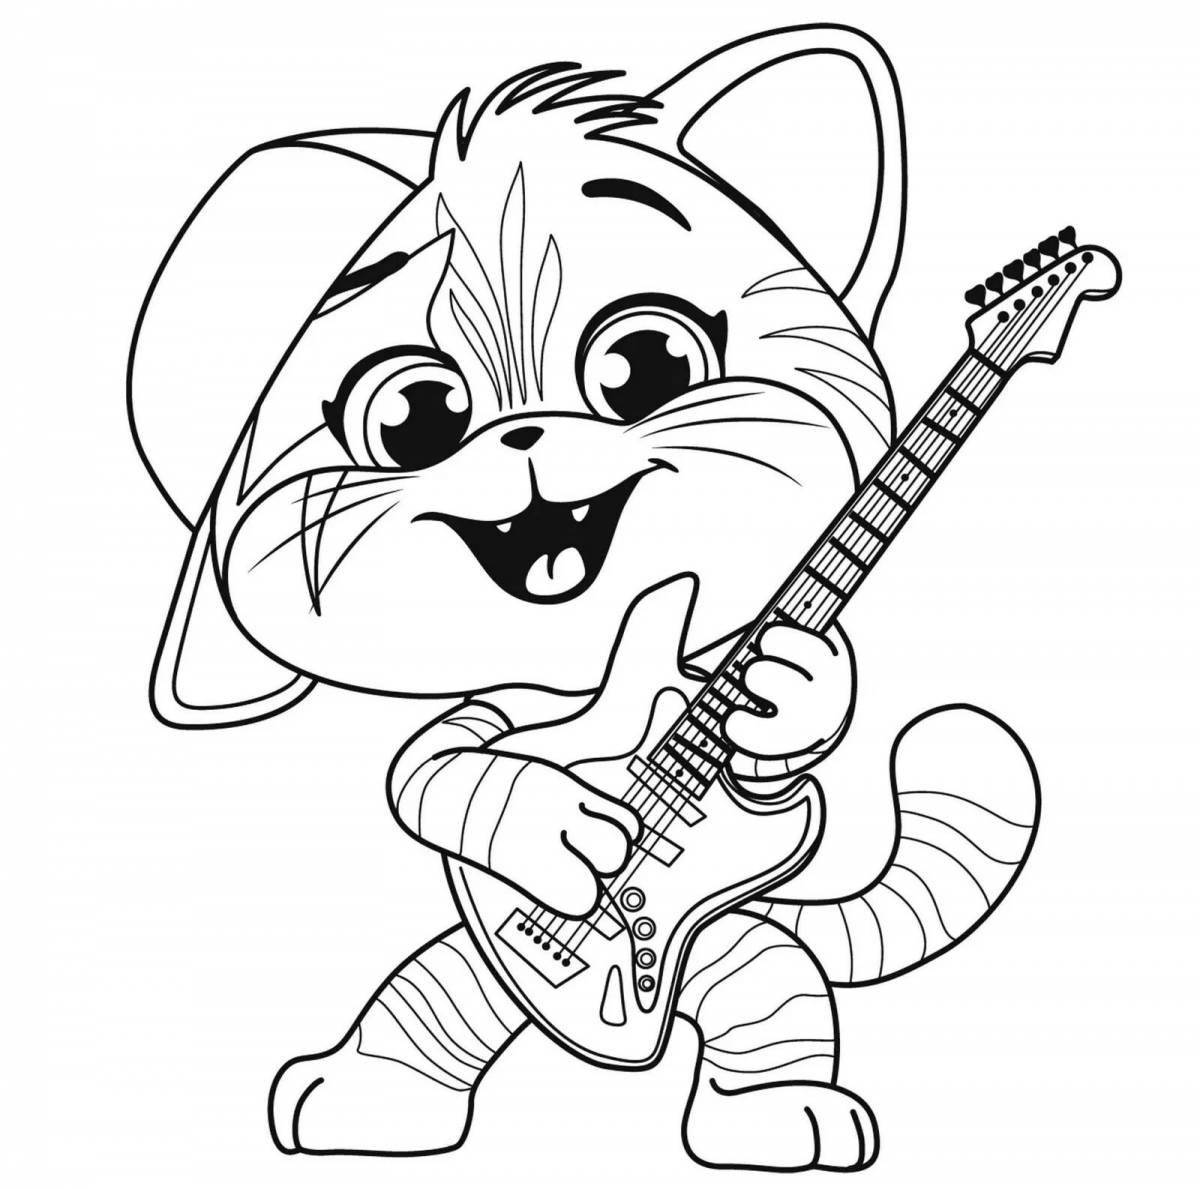 Silly coloring cartoon cat